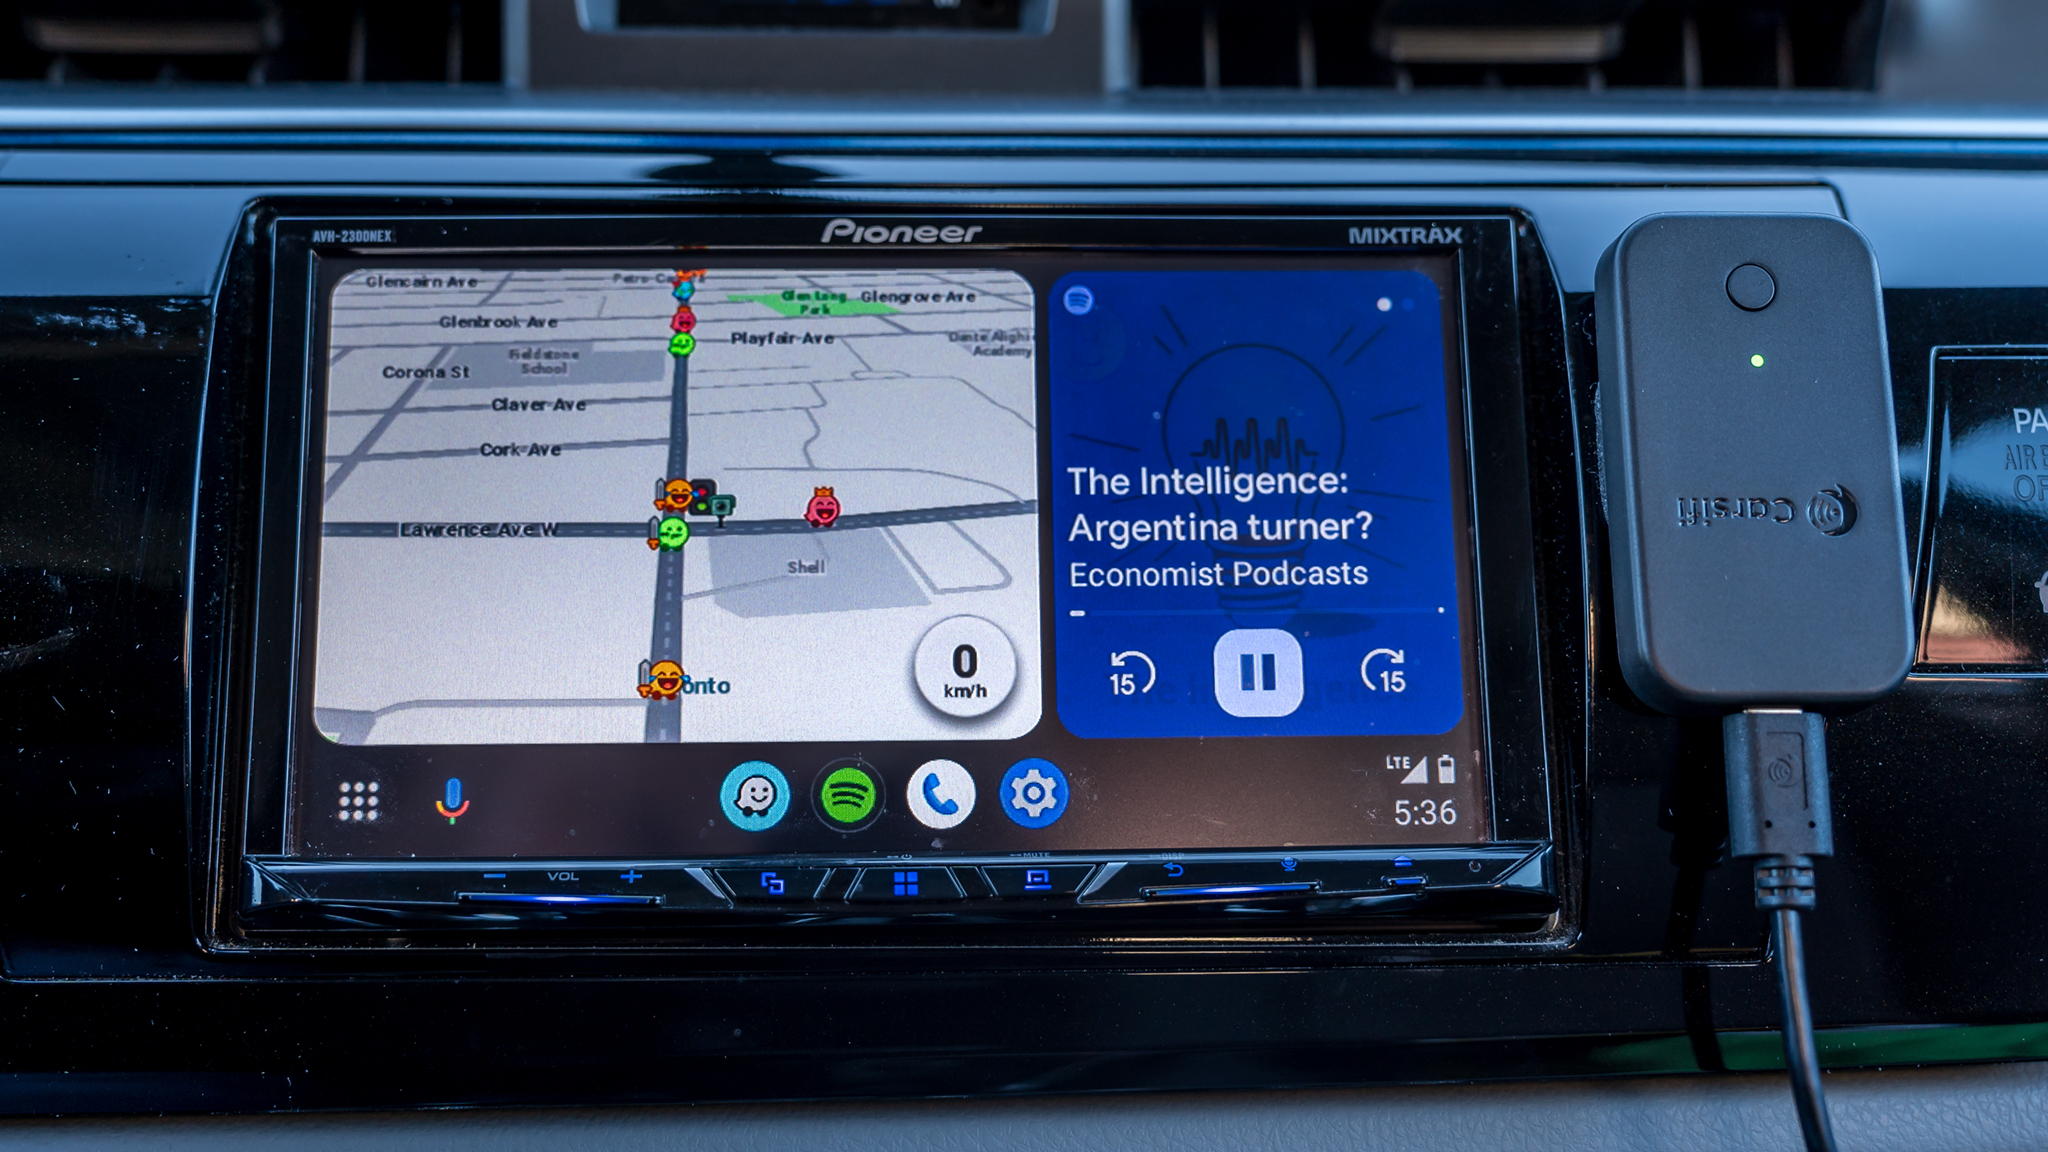 Carsifi Android Auto adapter next to the front view of the Android Auto screen.